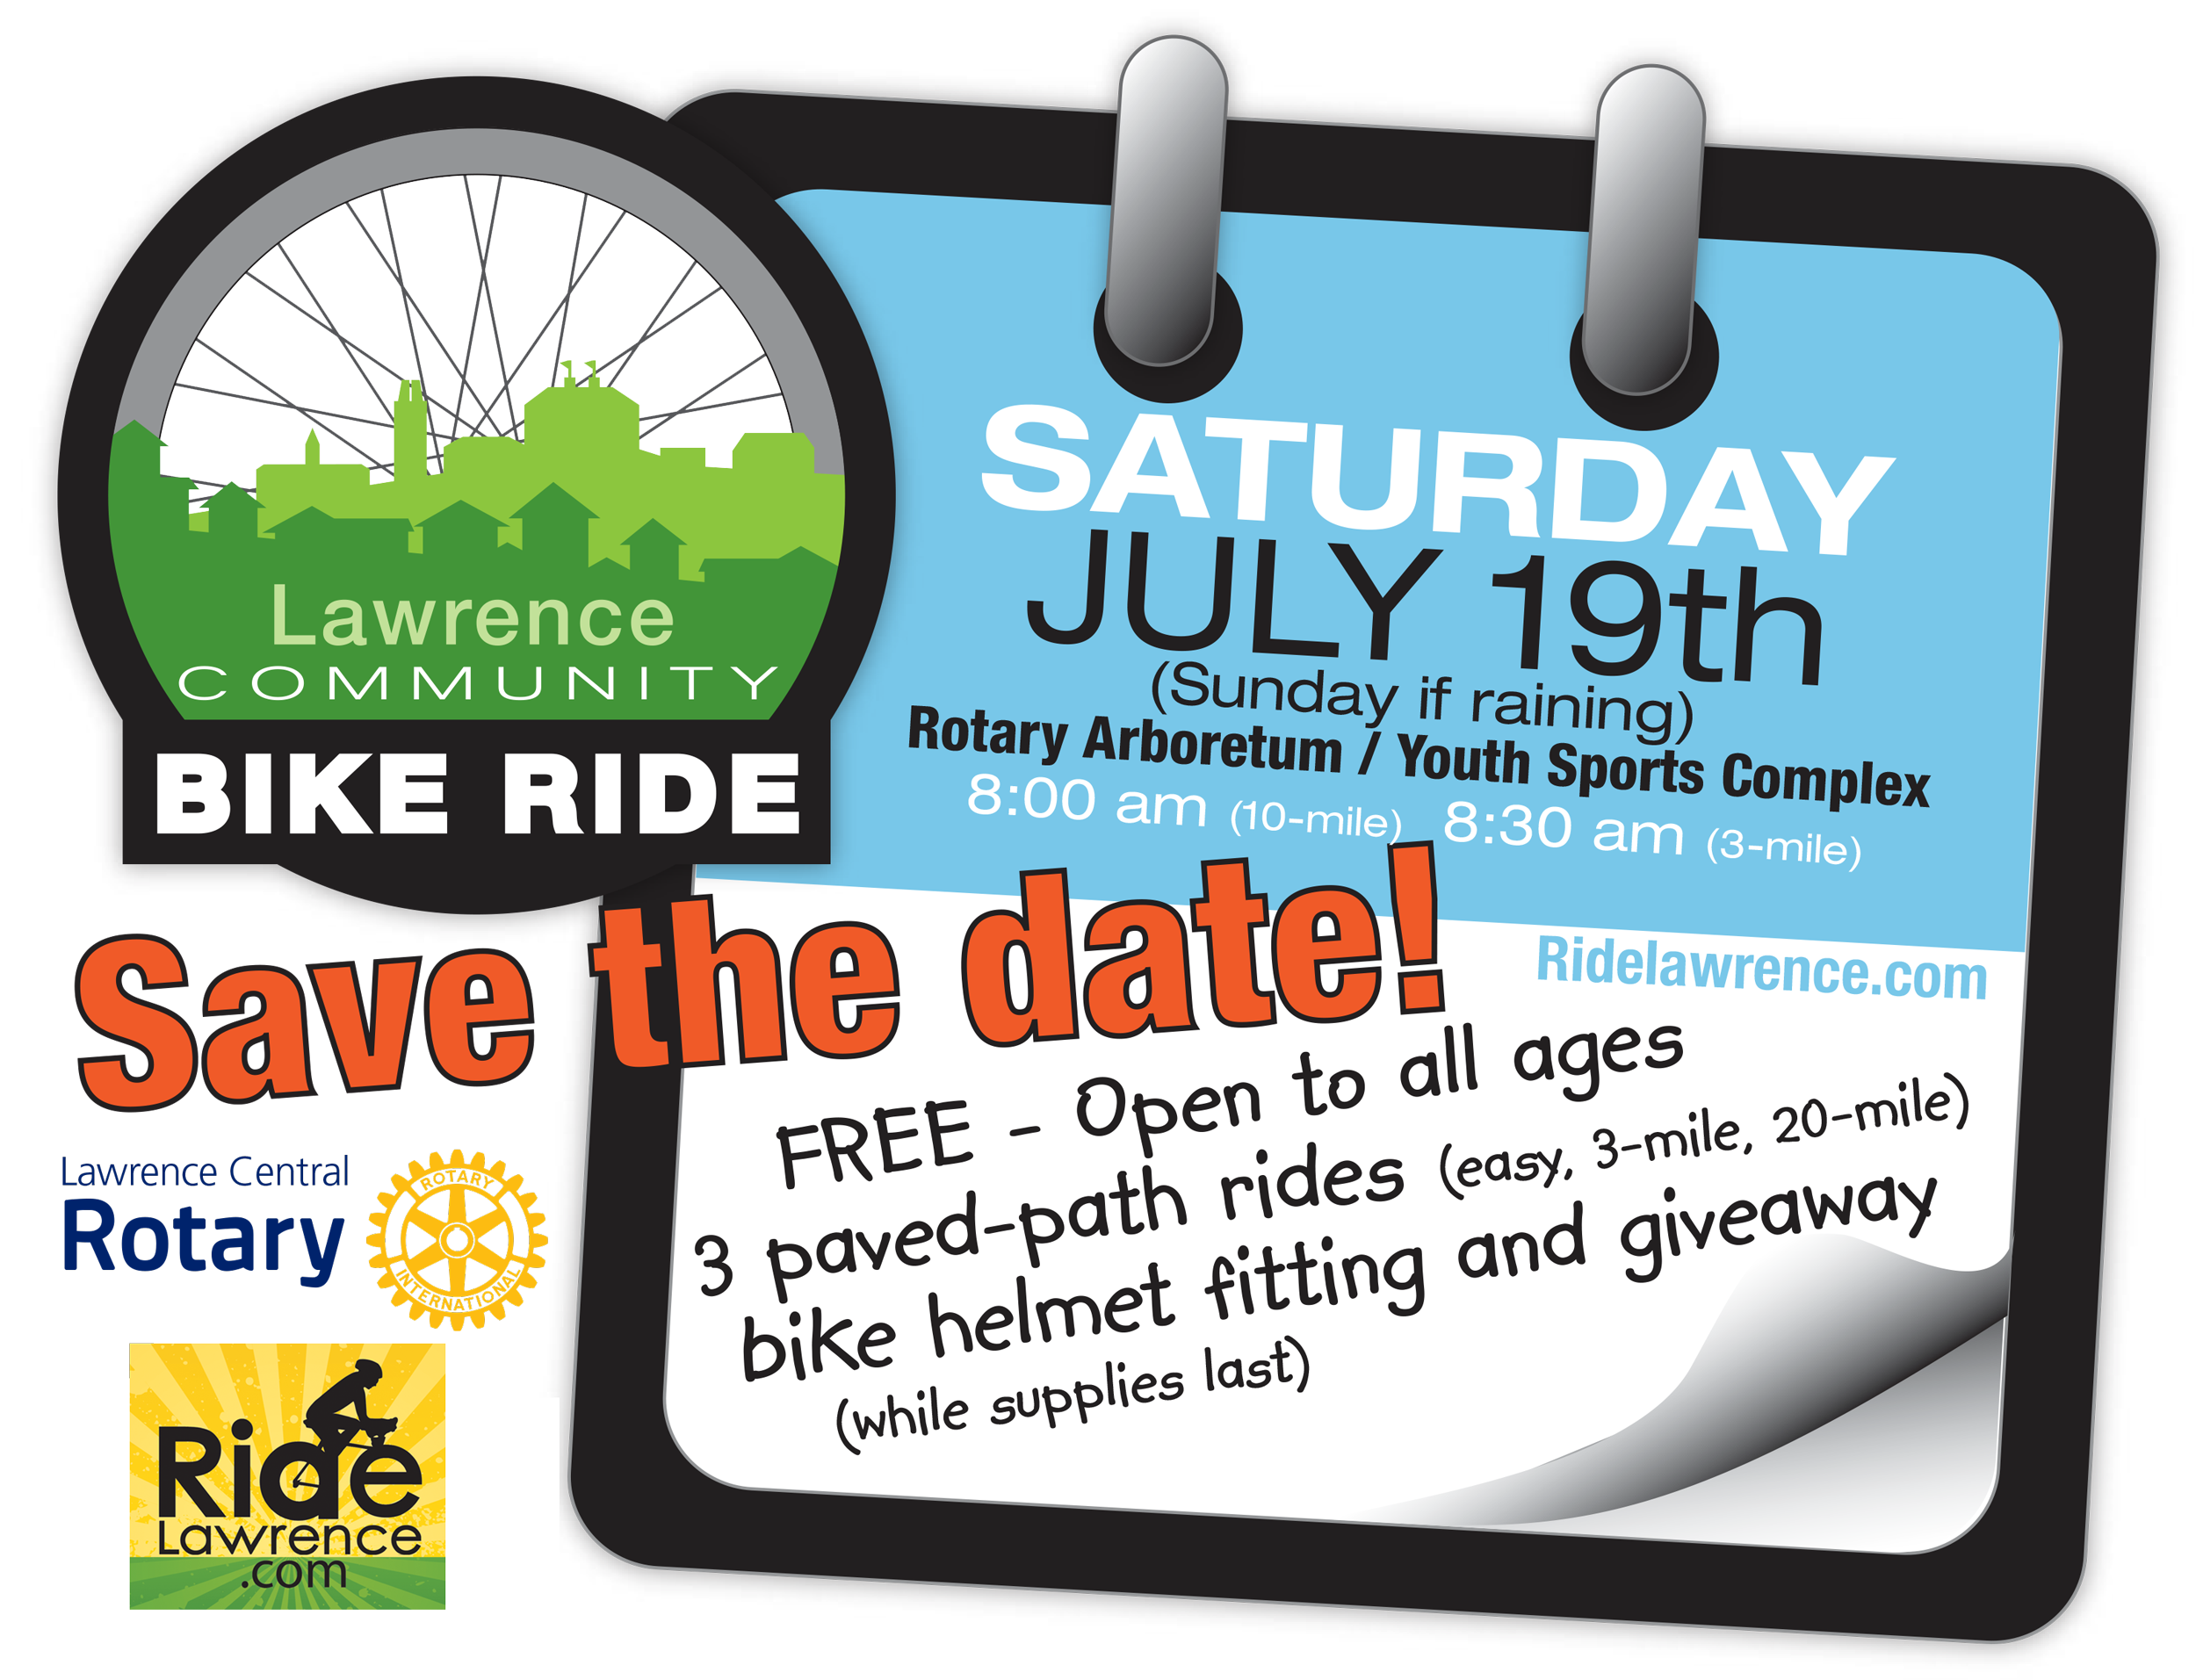 Mark Your Calendars Now For the 2014 Lawrence Community Bike Ride July